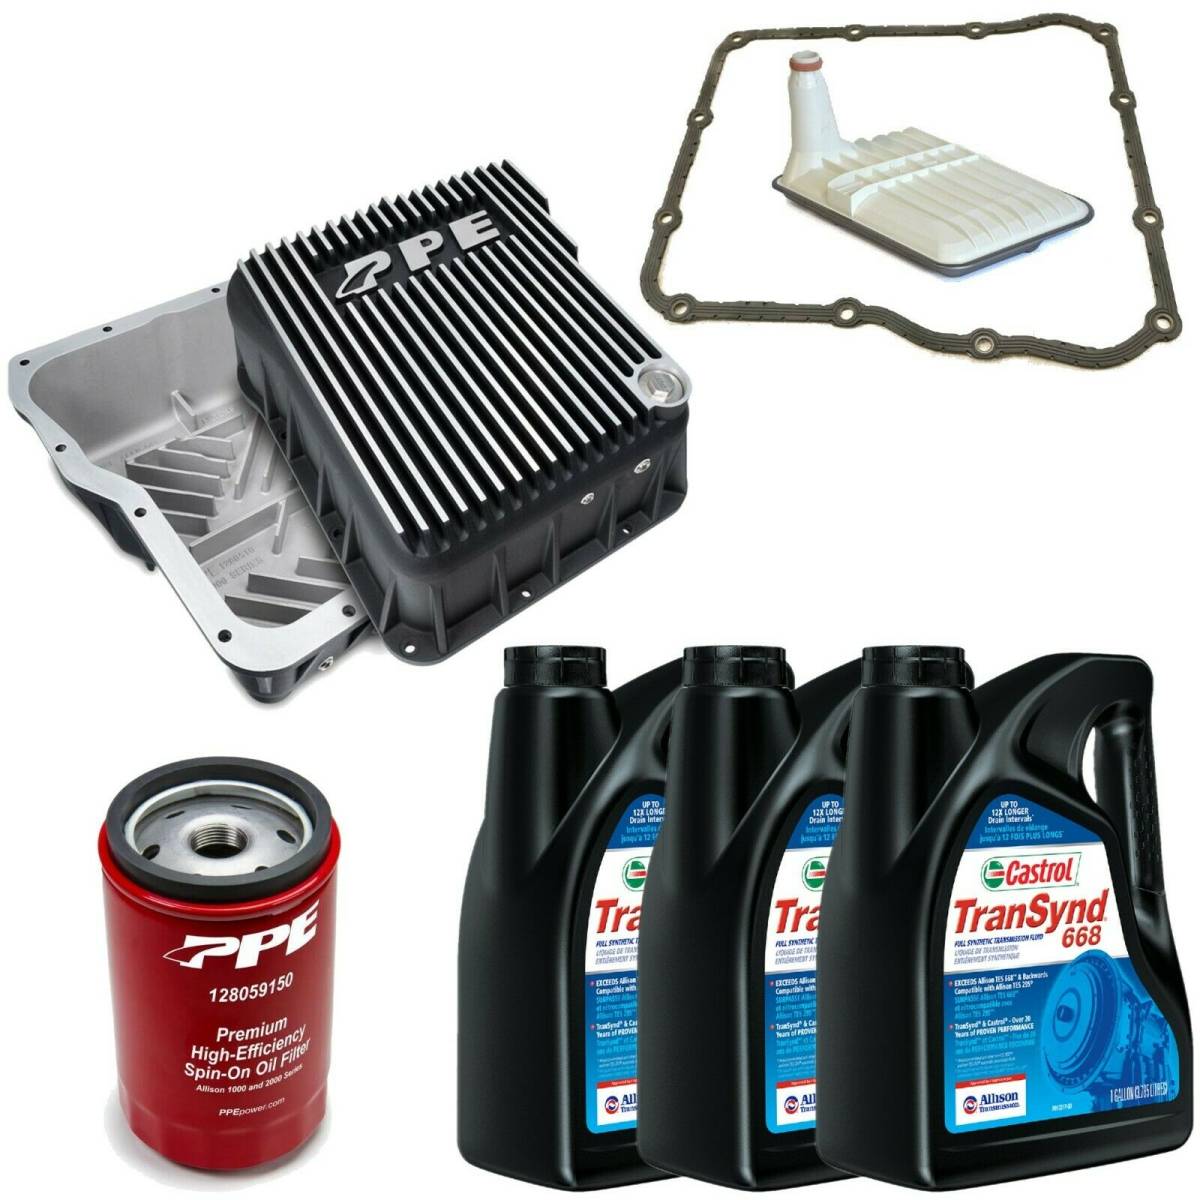 Image of ACDelco Allison 1000 Transmission Kit & PPE Brushed Deep Pan For 01-19 GM Trucks